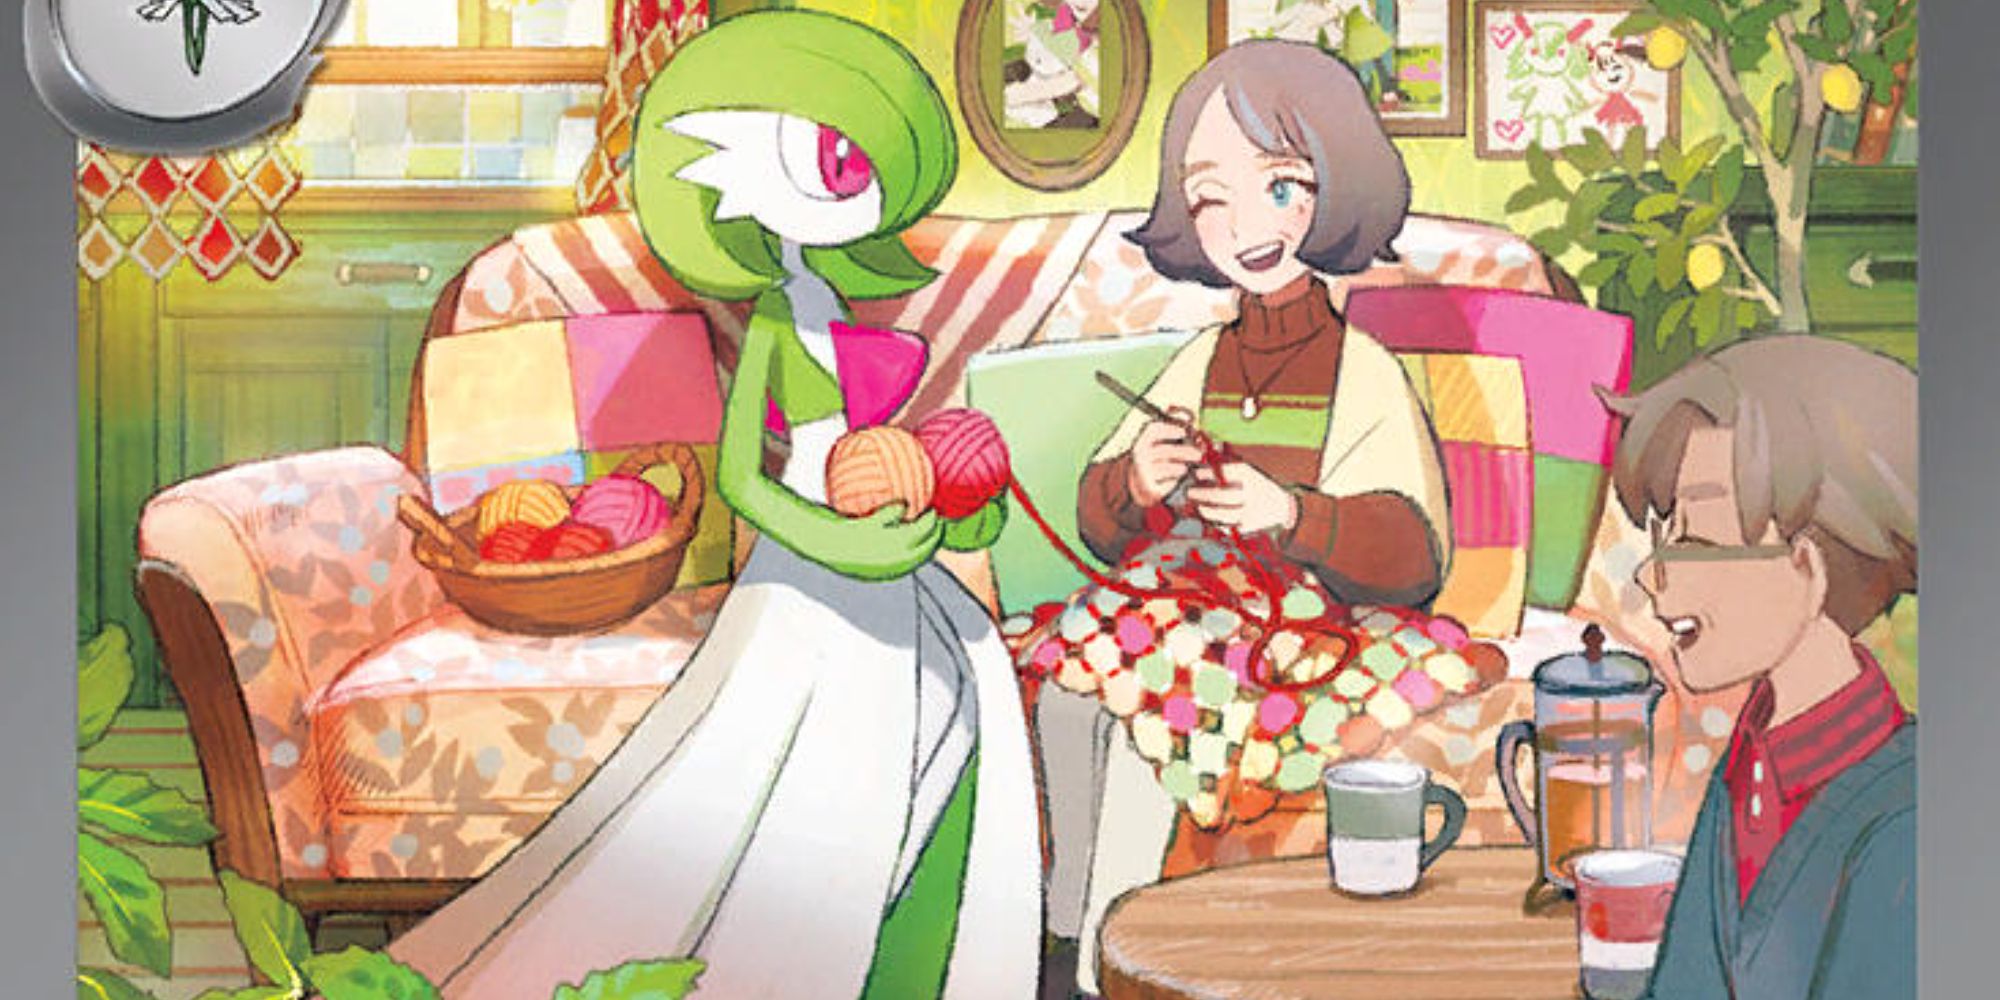 Gardevoir holding yarn for an old lady